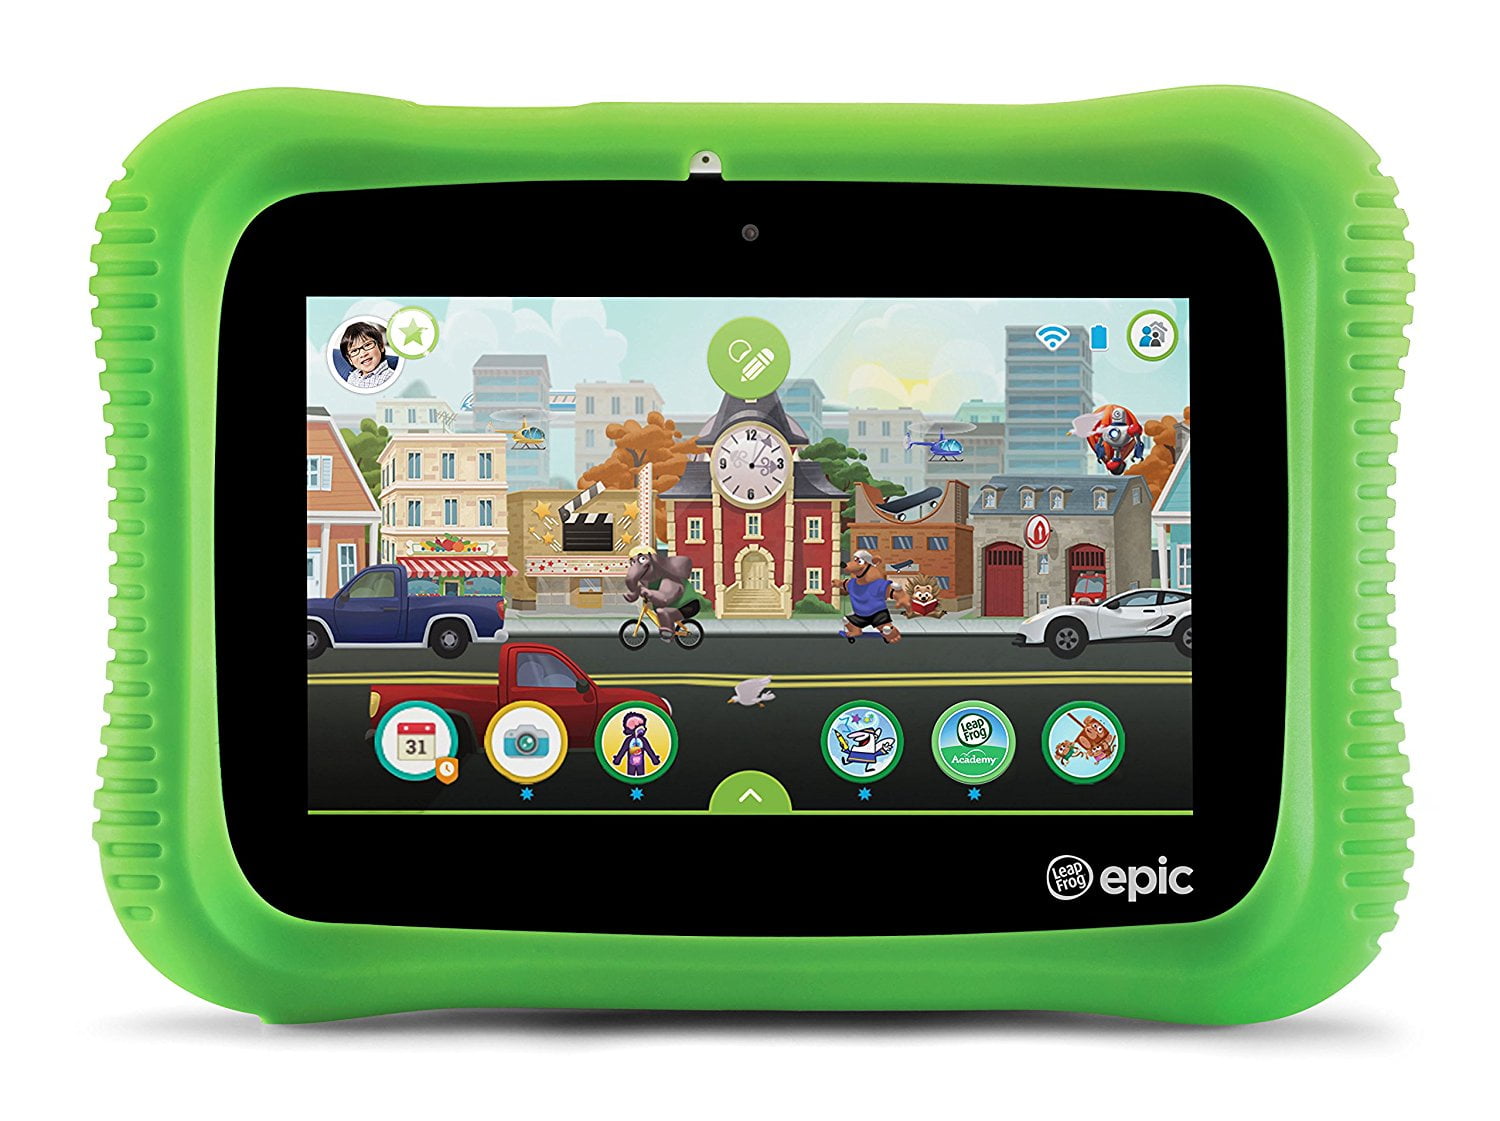 Leapfrog Epic Academy Edition 7" Learning Tablet Tested/Working Open Box